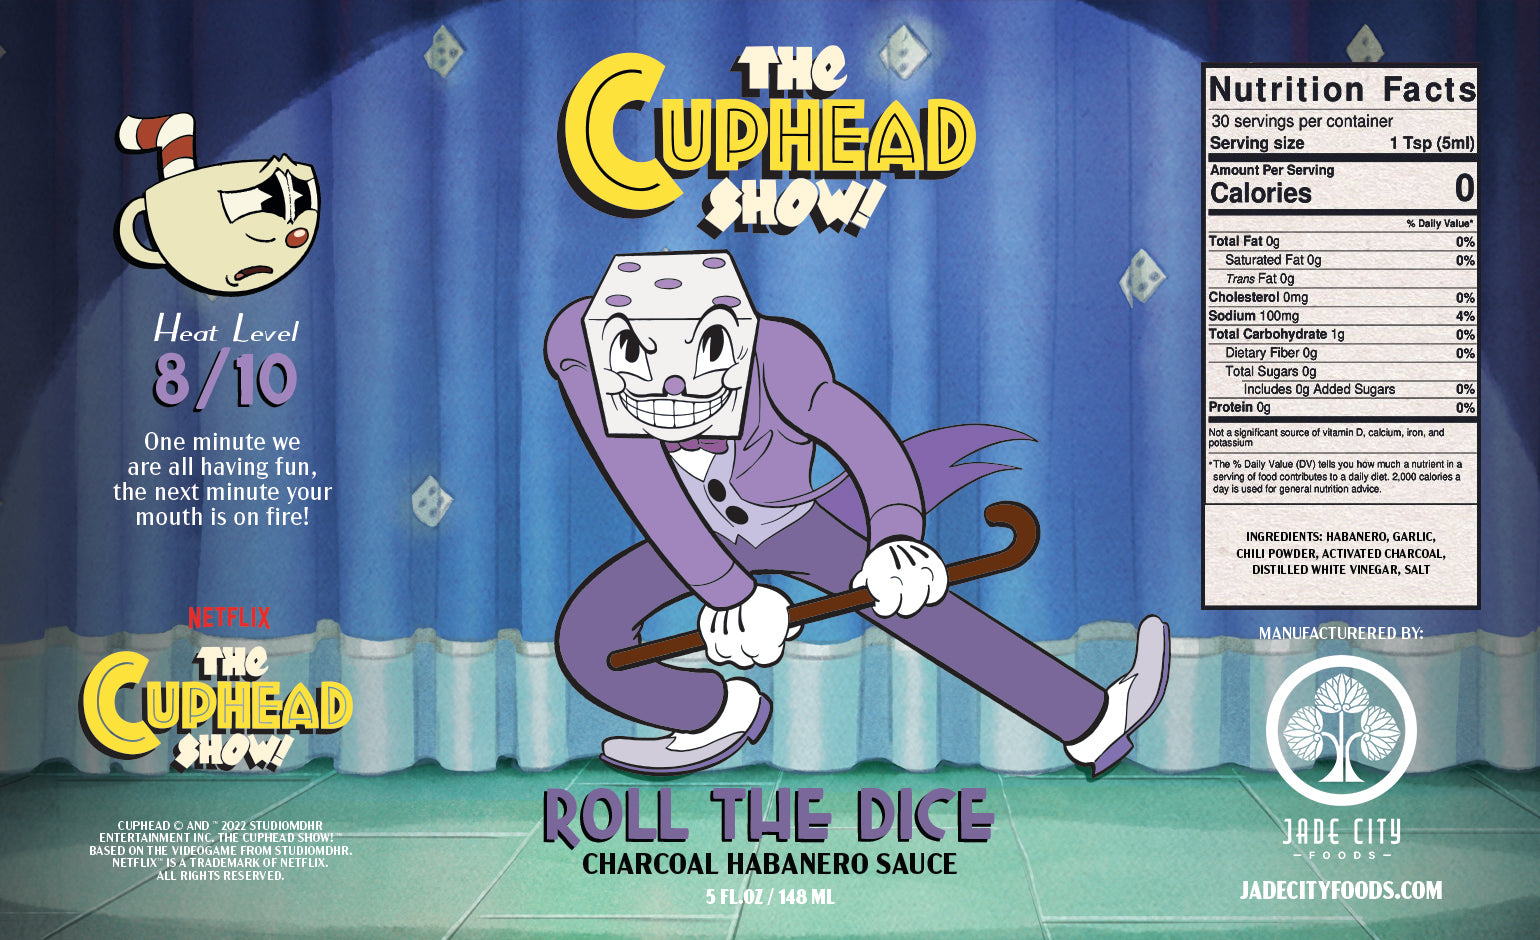 King Dice's Roll The Dice : Charcoal Habanero Sauce